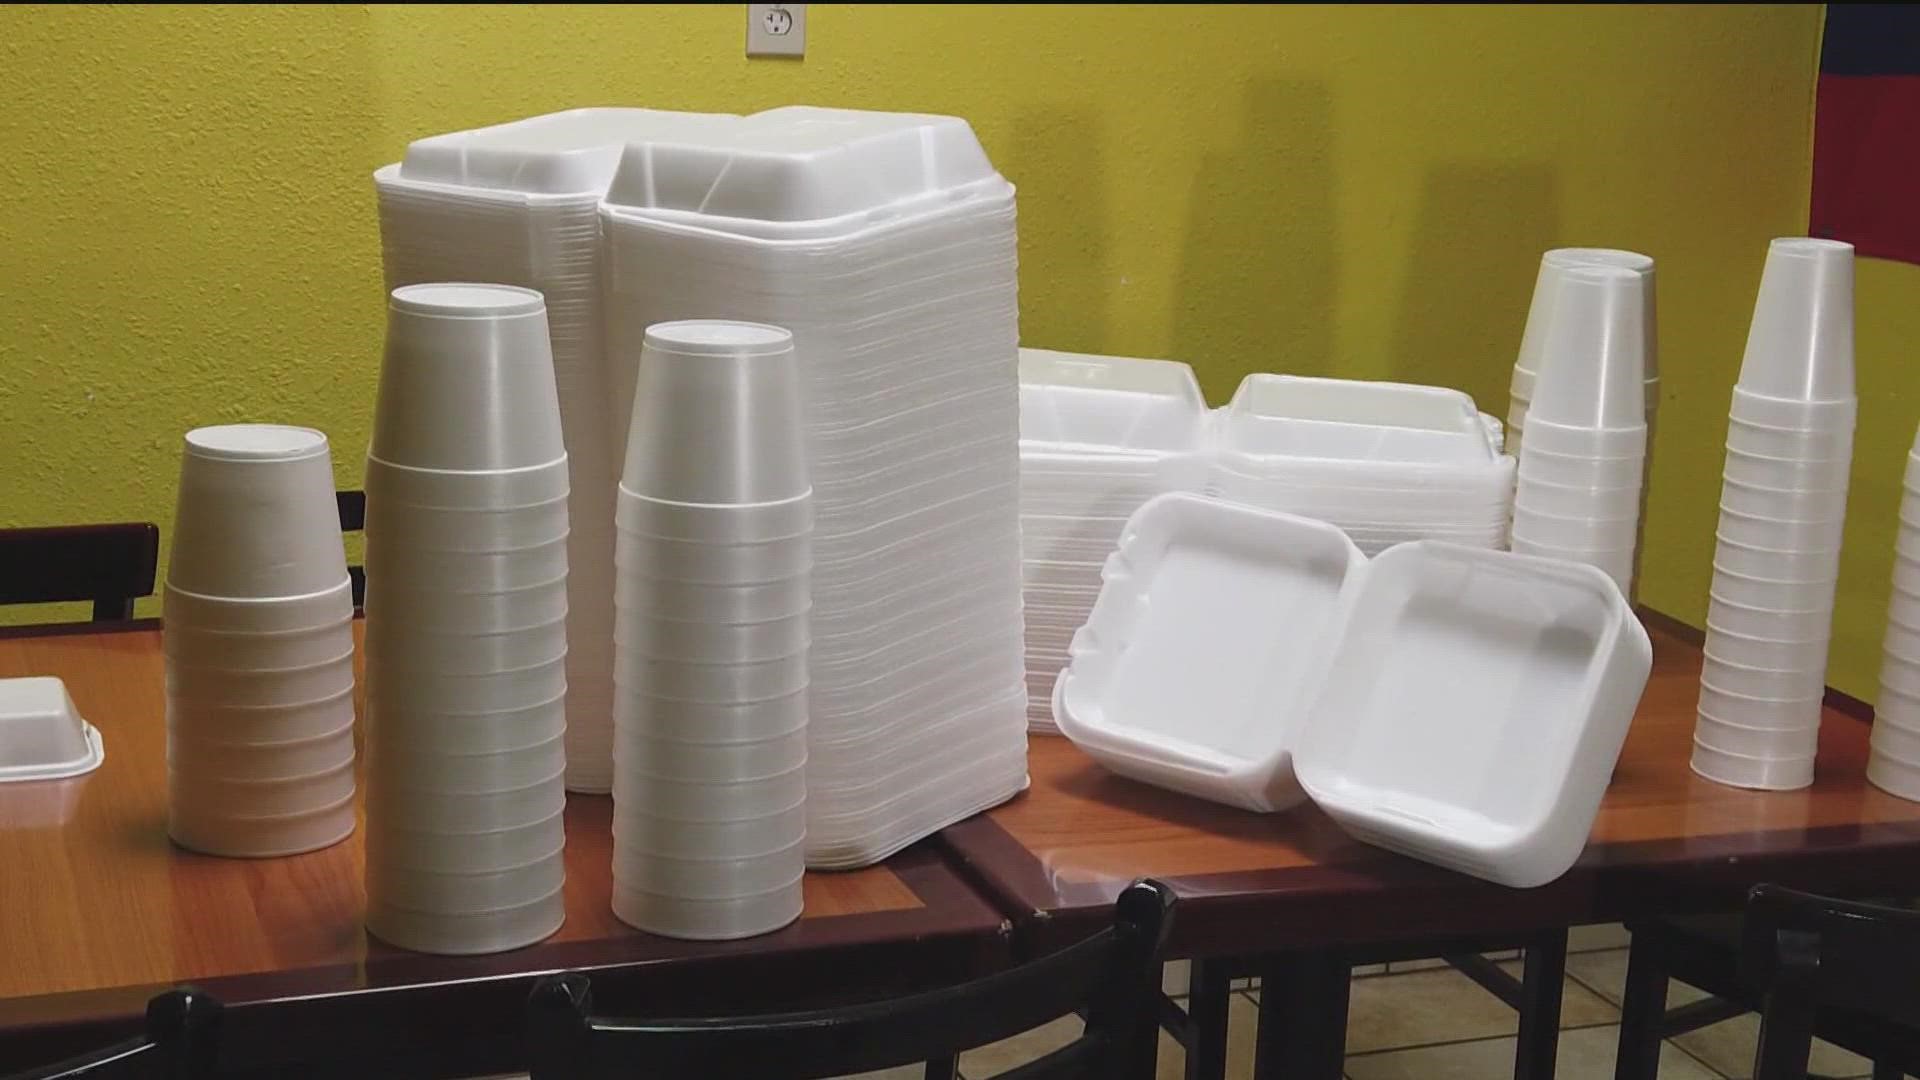 Styrofoam plates, cups won't be sold in N.J. stores when bag ban